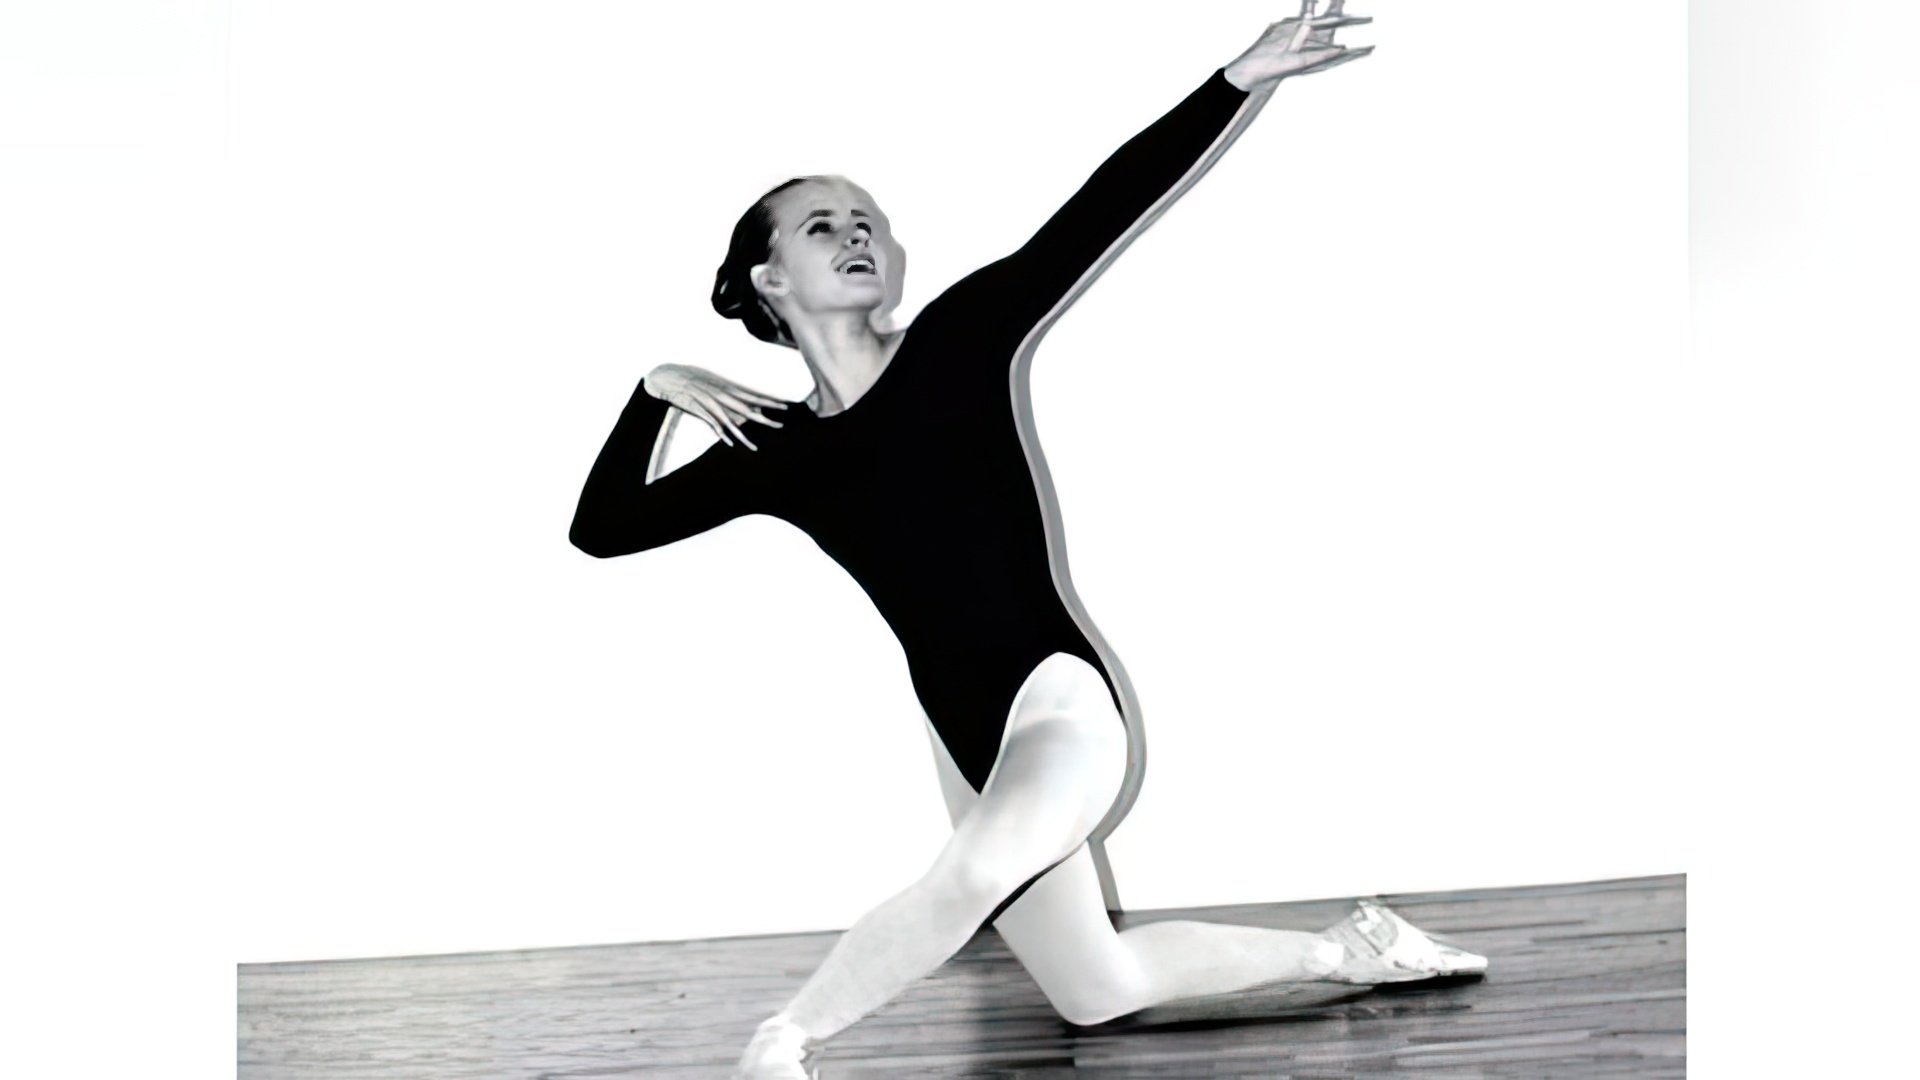 In her youth, Amy Adams dreamed of becoming a great ballerina